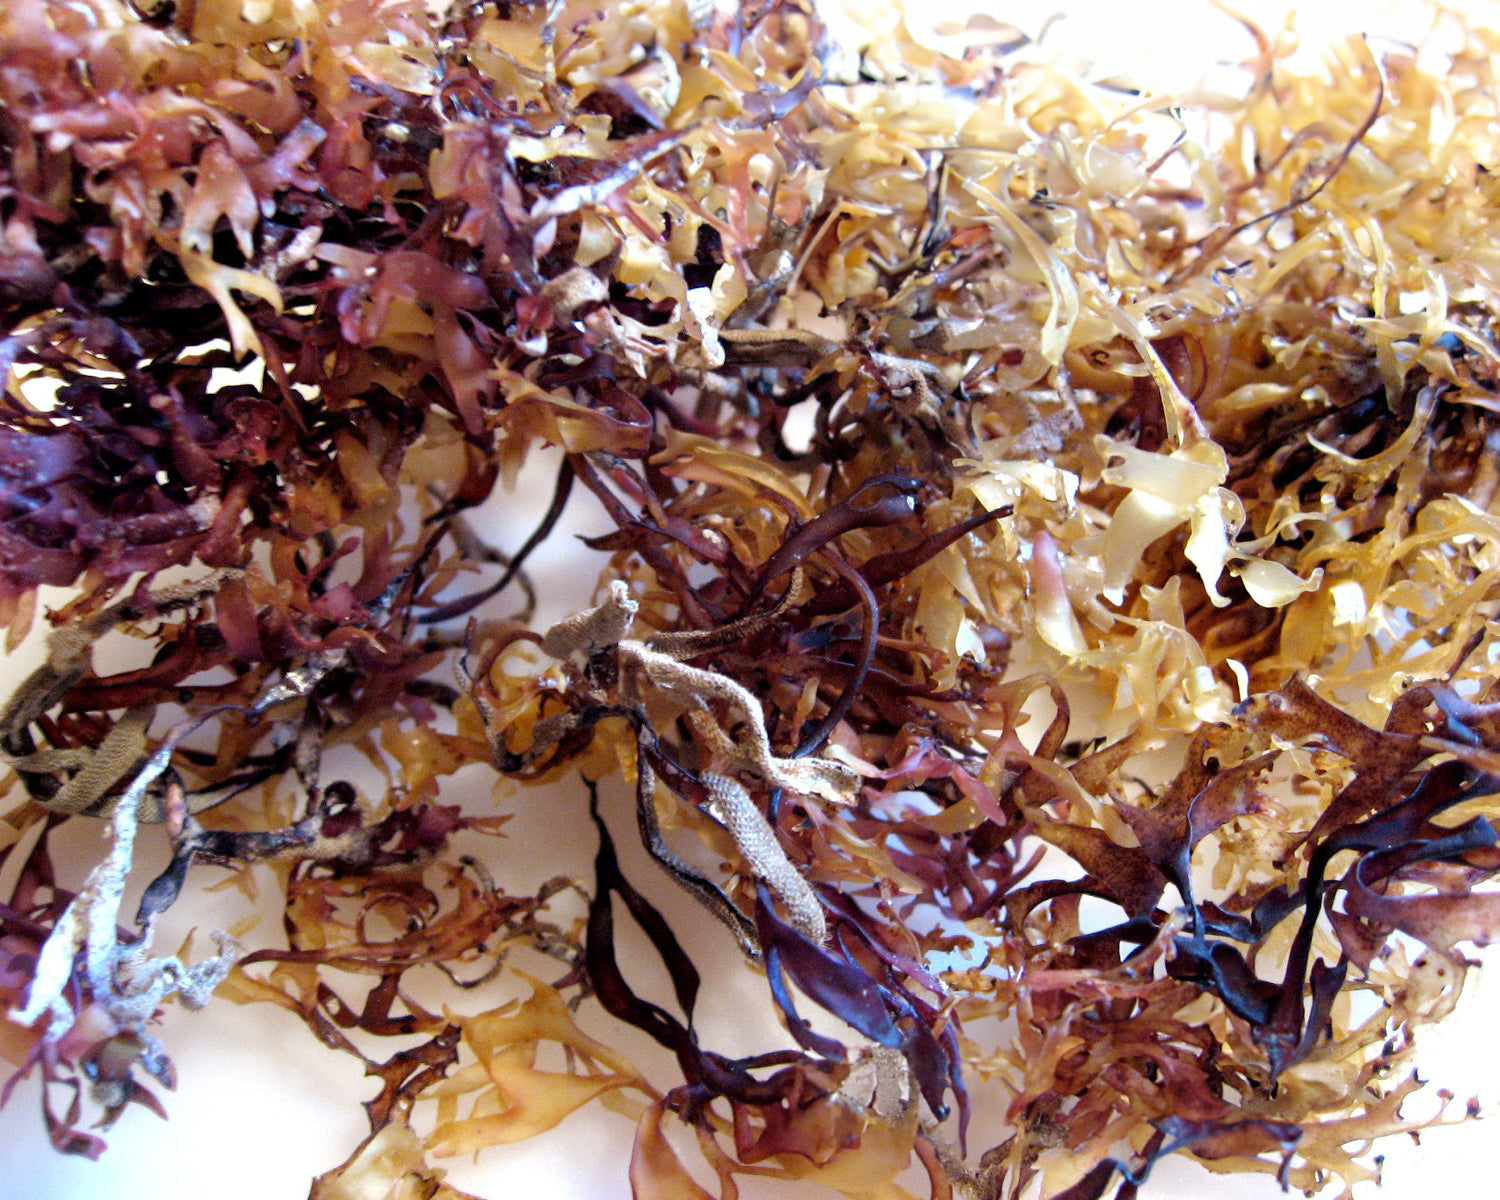 Irish Sea Moss one of the ingredients in Super 3